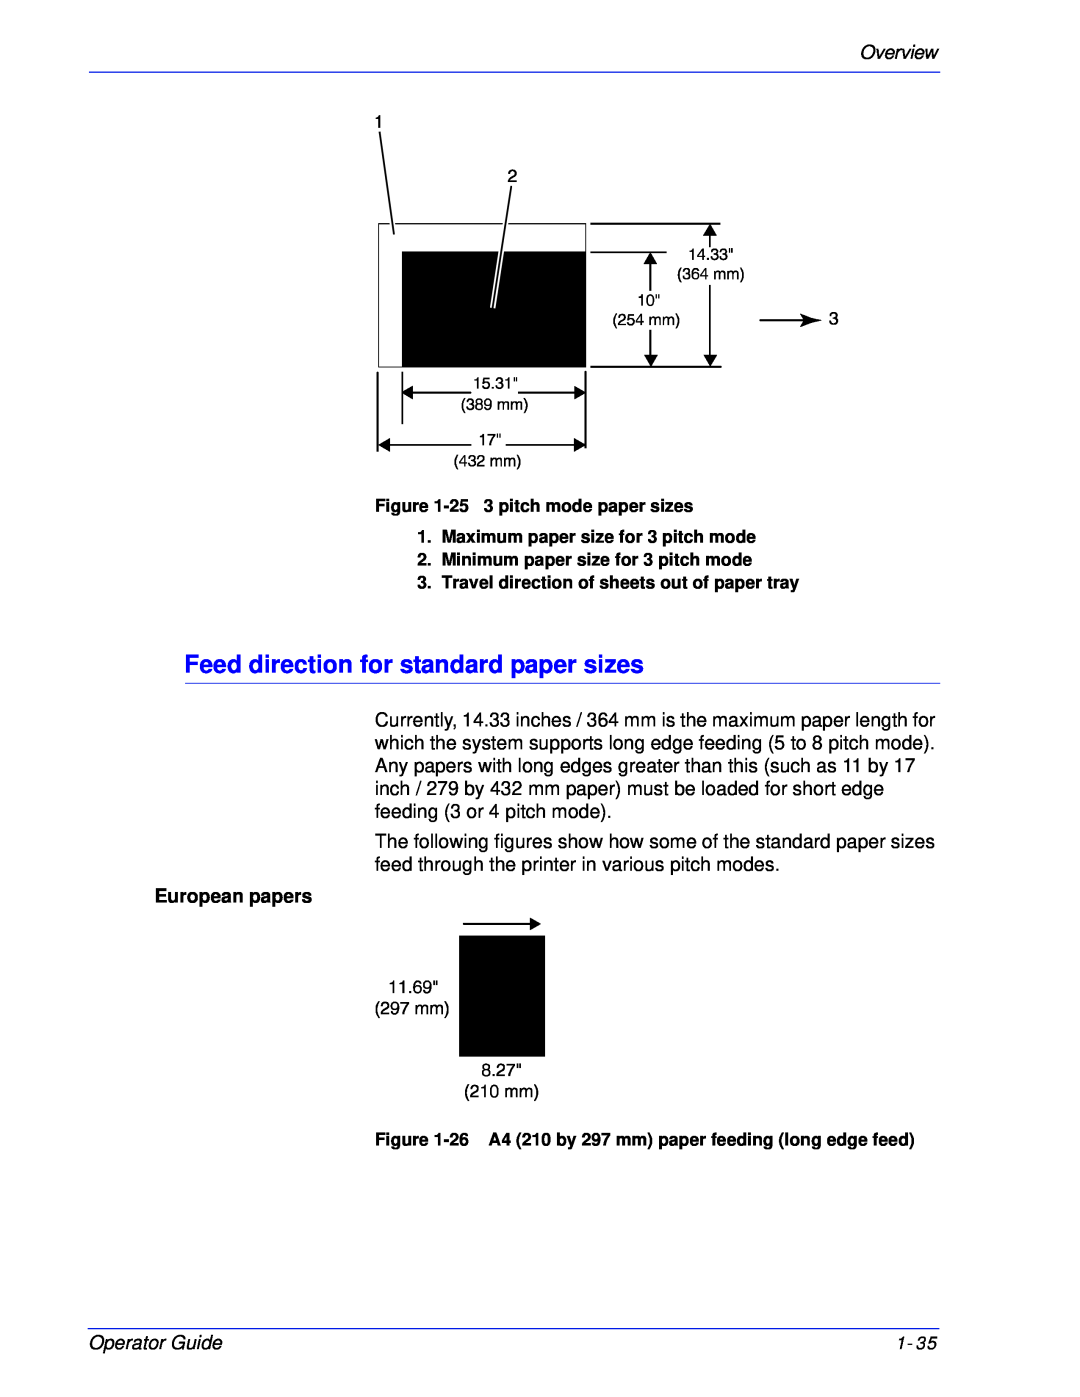 Xerox 180 EPS, 100 manual Feed direction for standard paper sizes, Overview, European papers, Operator Guide 